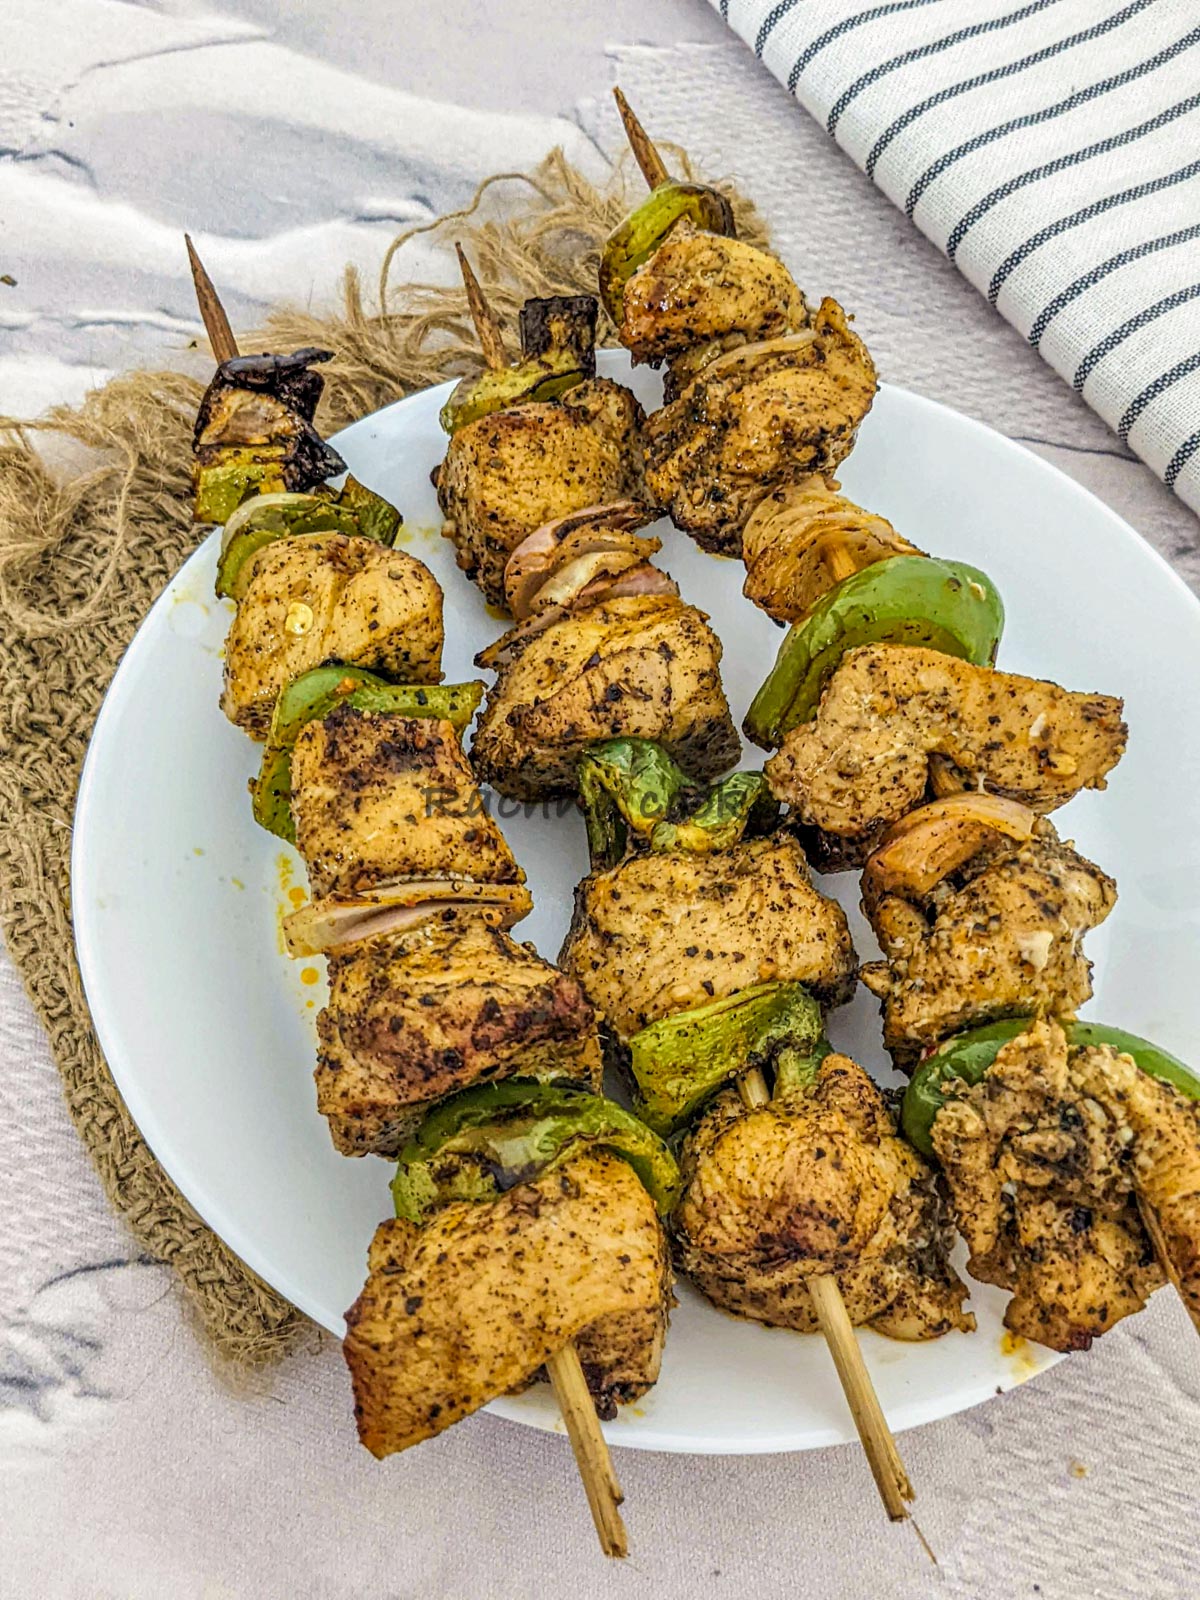 3 skewers of chicken kabobs after air frying served on a white plate.